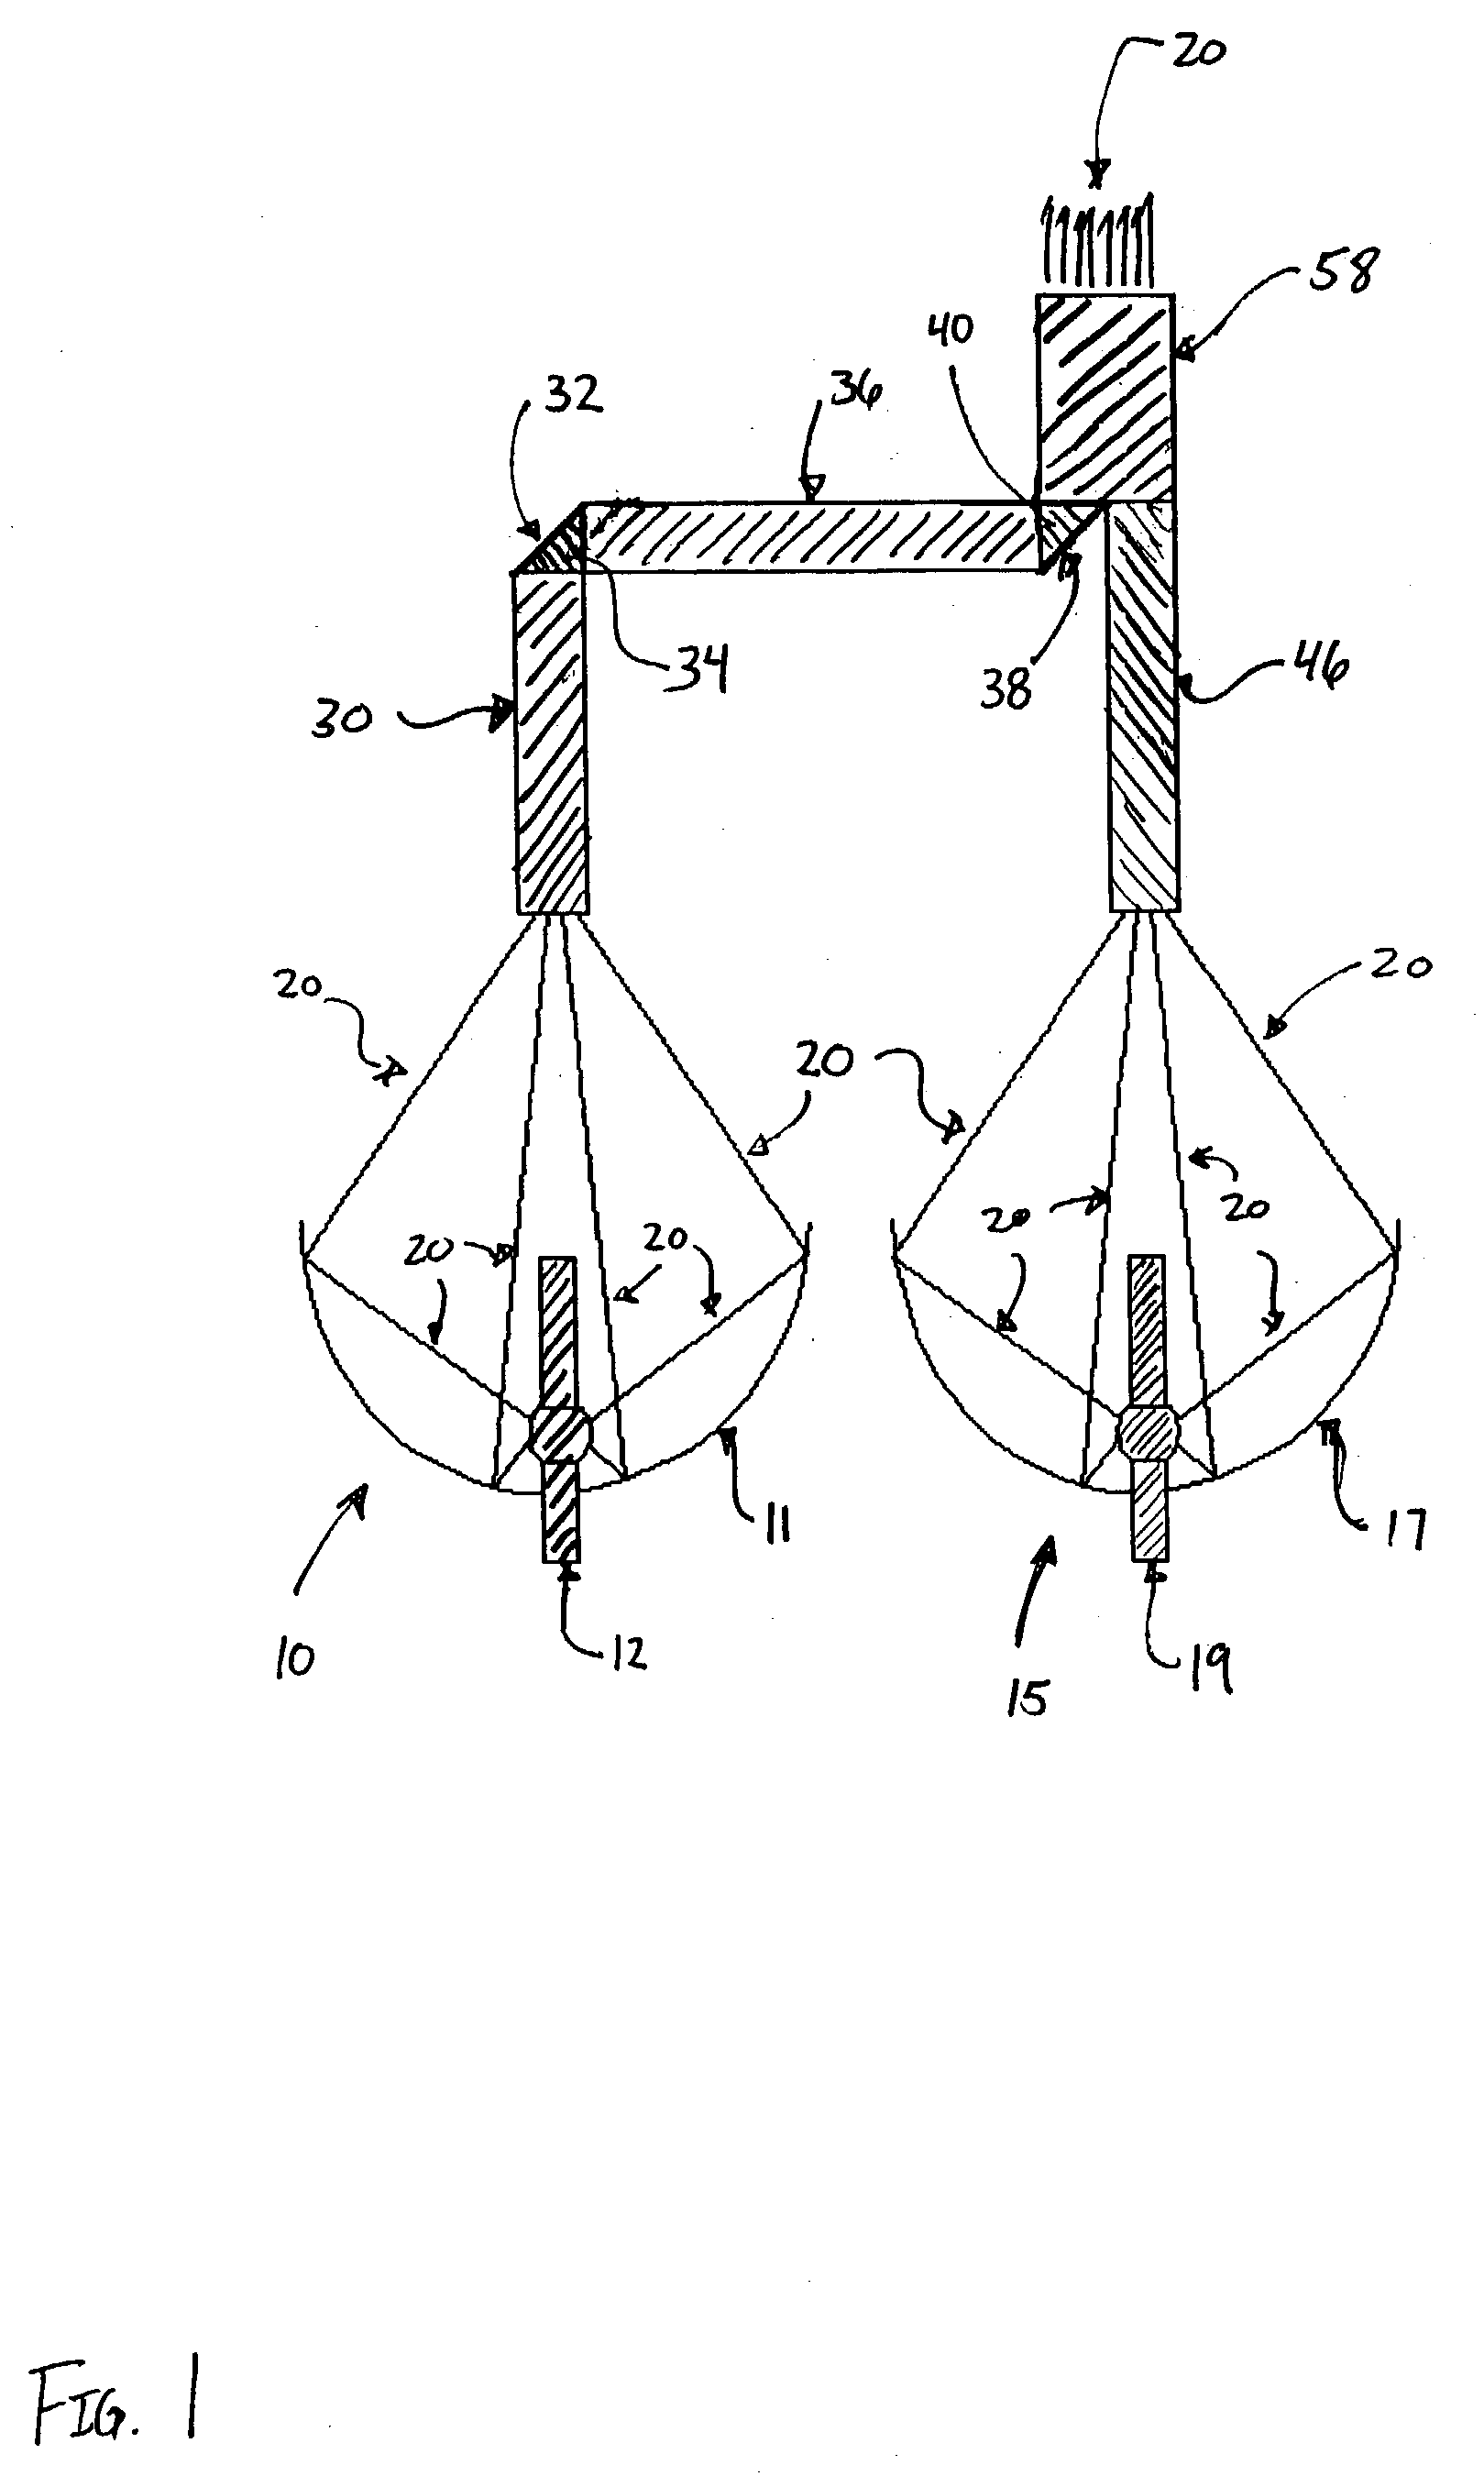 Multi-lamp arrangement for optical systems